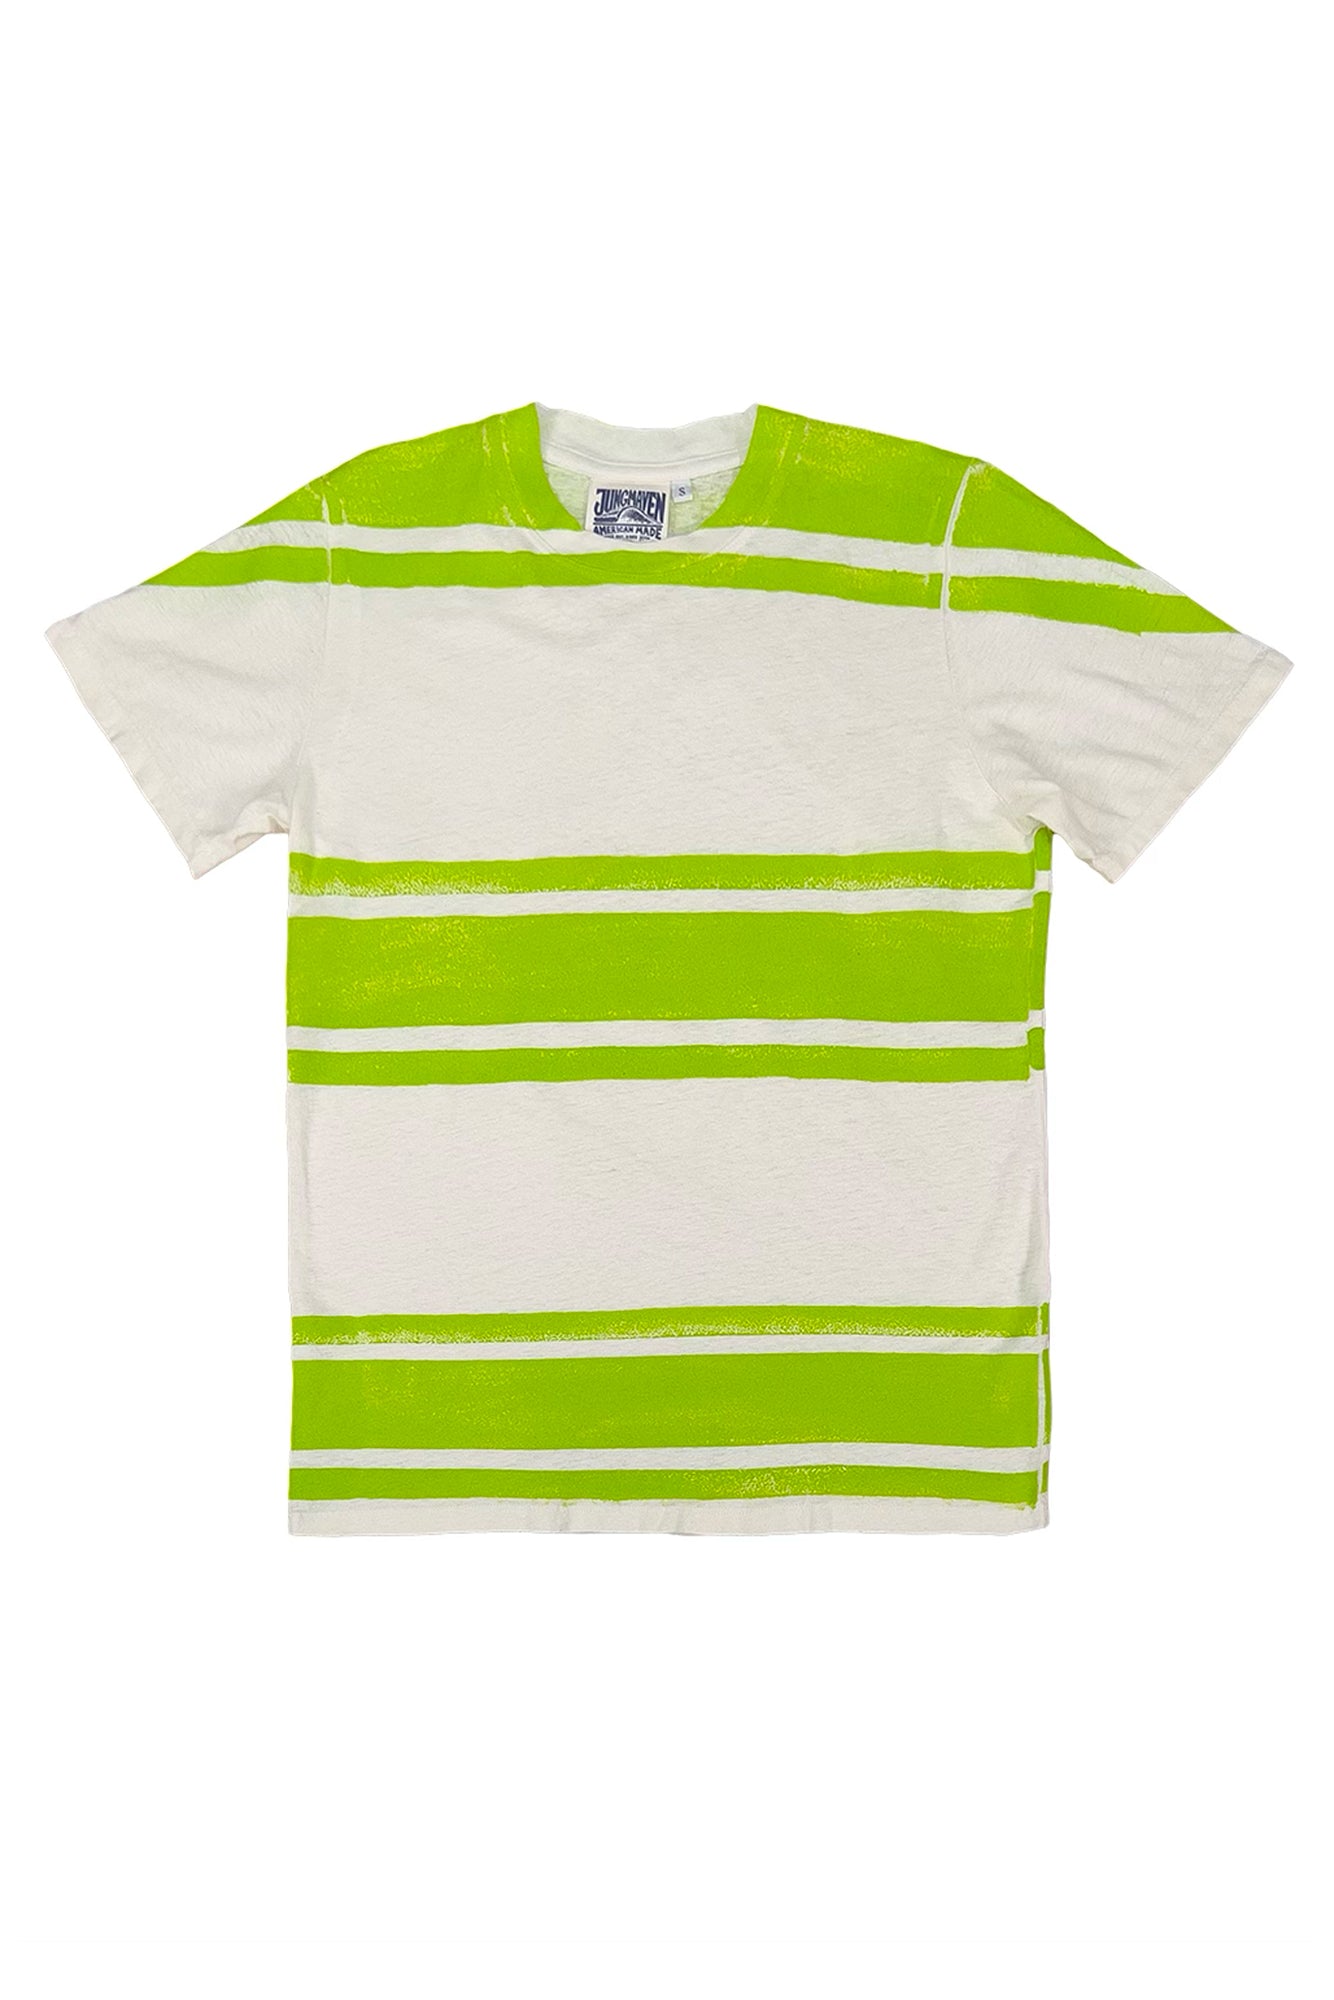 Three Stripe Jung Tee | Jungmaven Hemp Clothing & Accessories / Color: Limelight